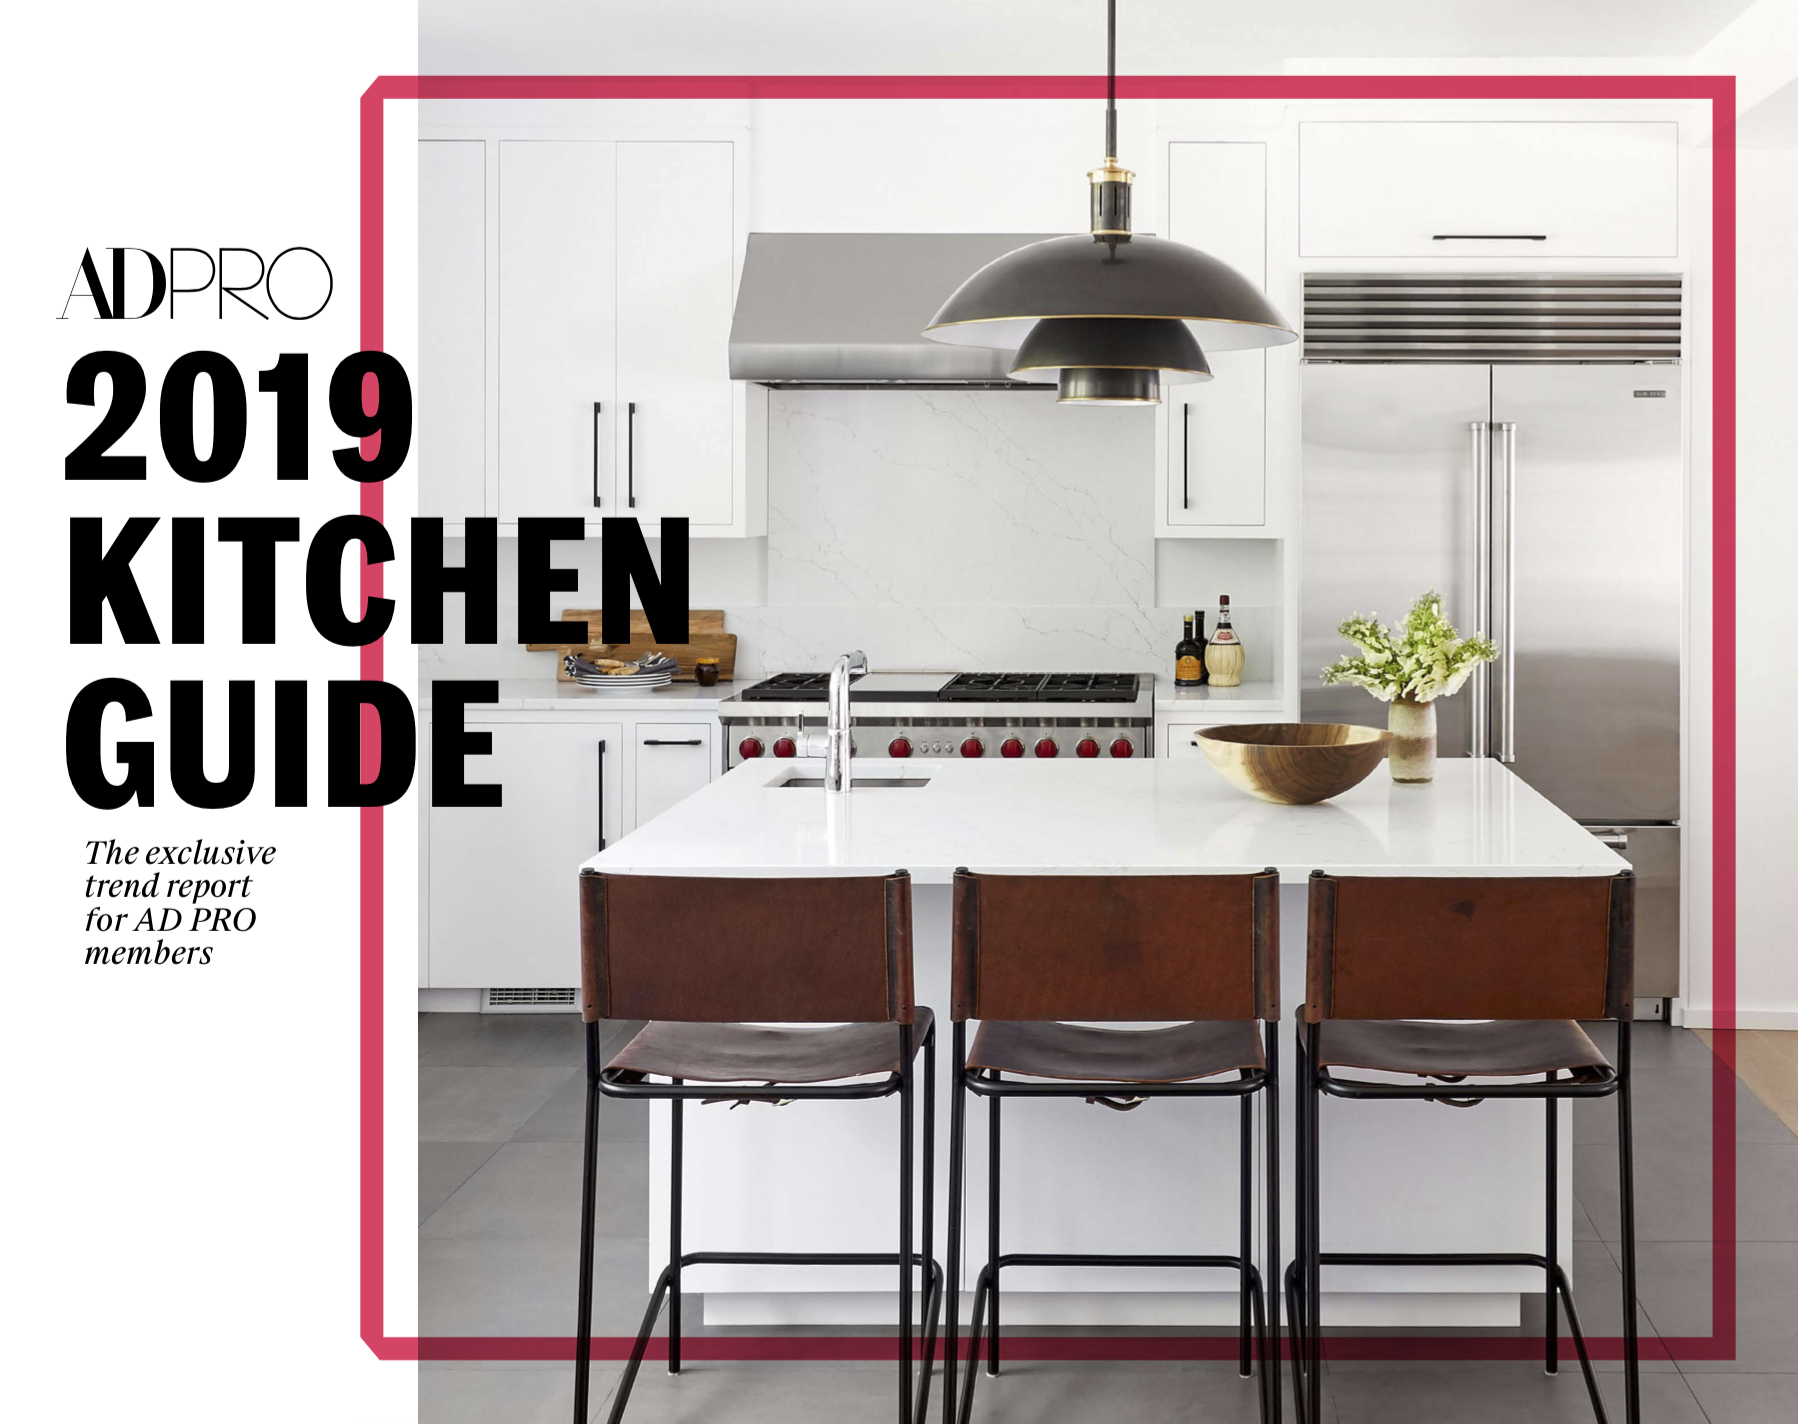 AD PRO's Kitchen Trends Report